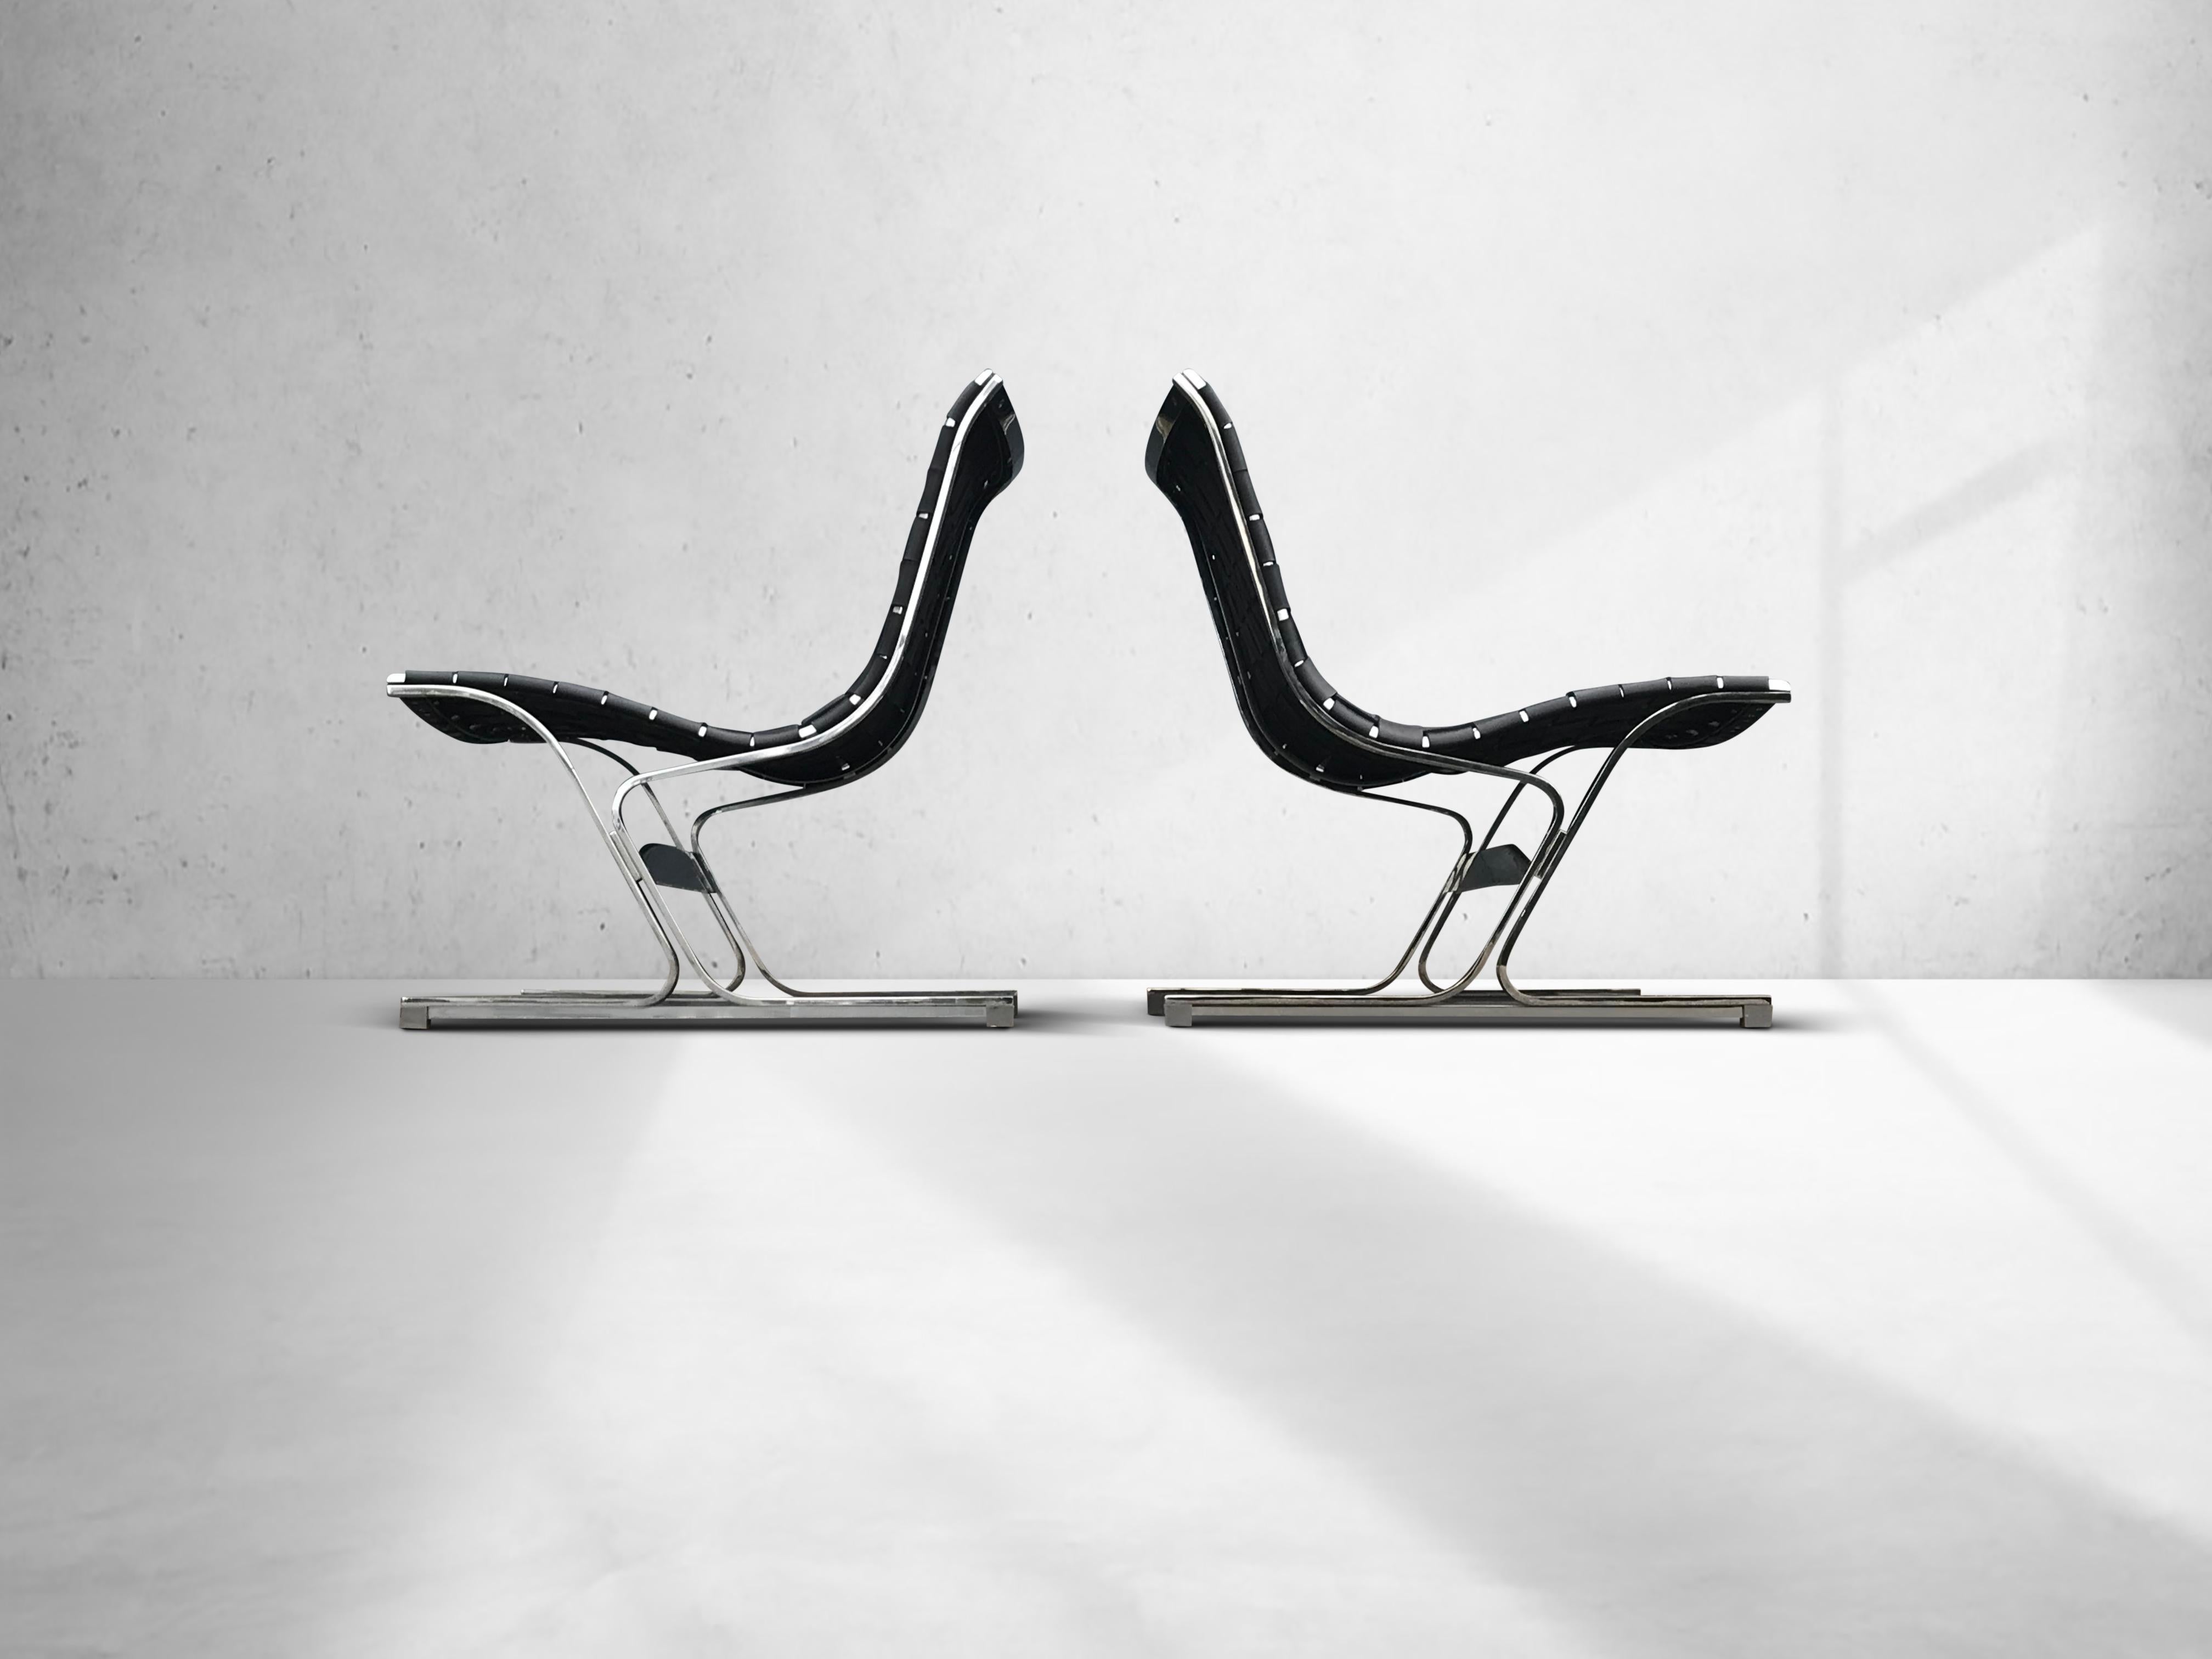 Late 20th Century PLR1 Luar lounge chair by Ross Littell for ICF De Padova Italy 1960s, set of 2 For Sale